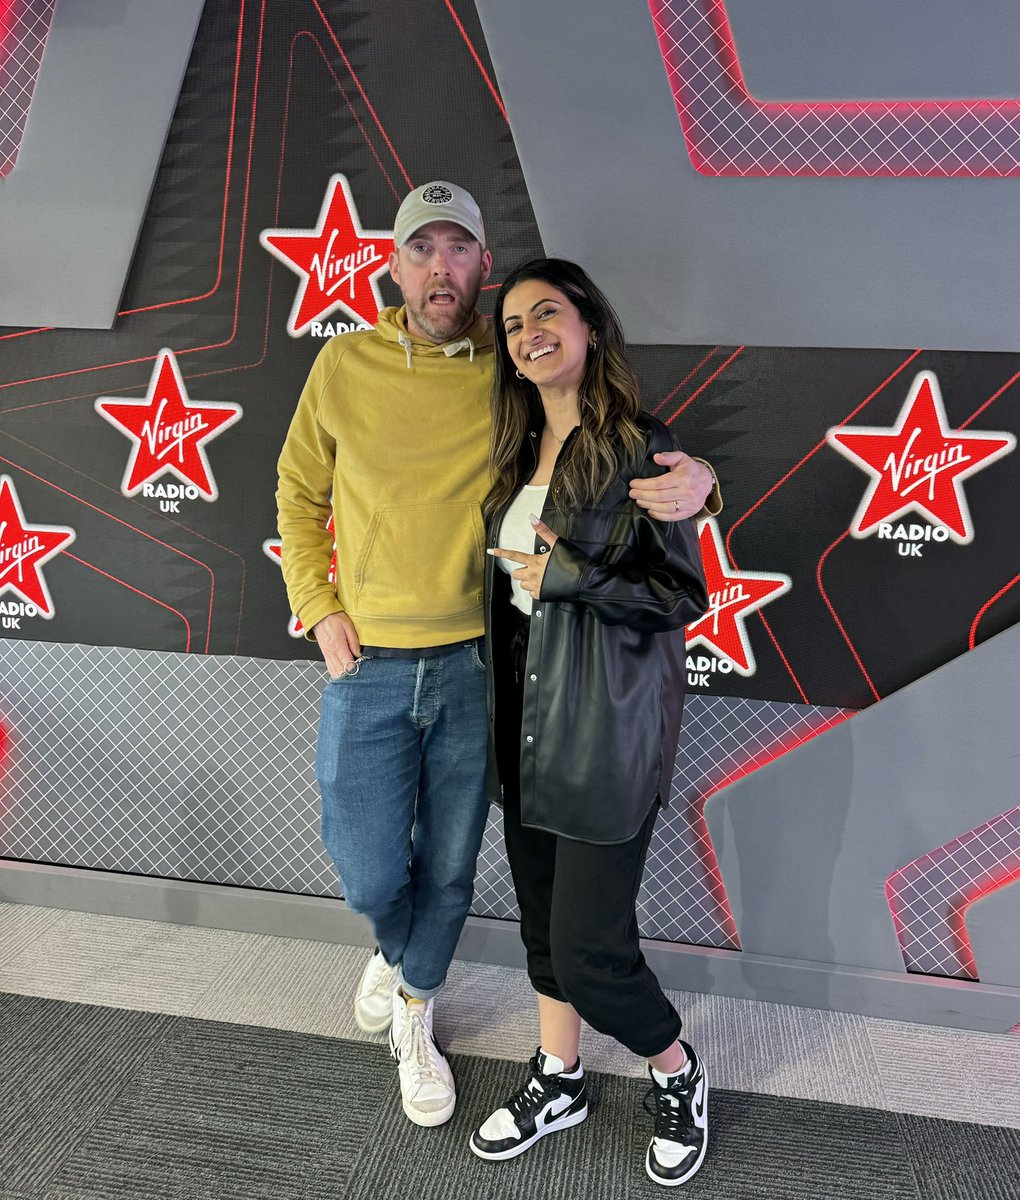 🚨 WE KICK START THIS WEEKEND🚨

1-4am - i’ll keep ya company on @VirginRadioUK 😁

Thanks Ricky for helping me get the “launch pic” 😂. New show, new me and all that…